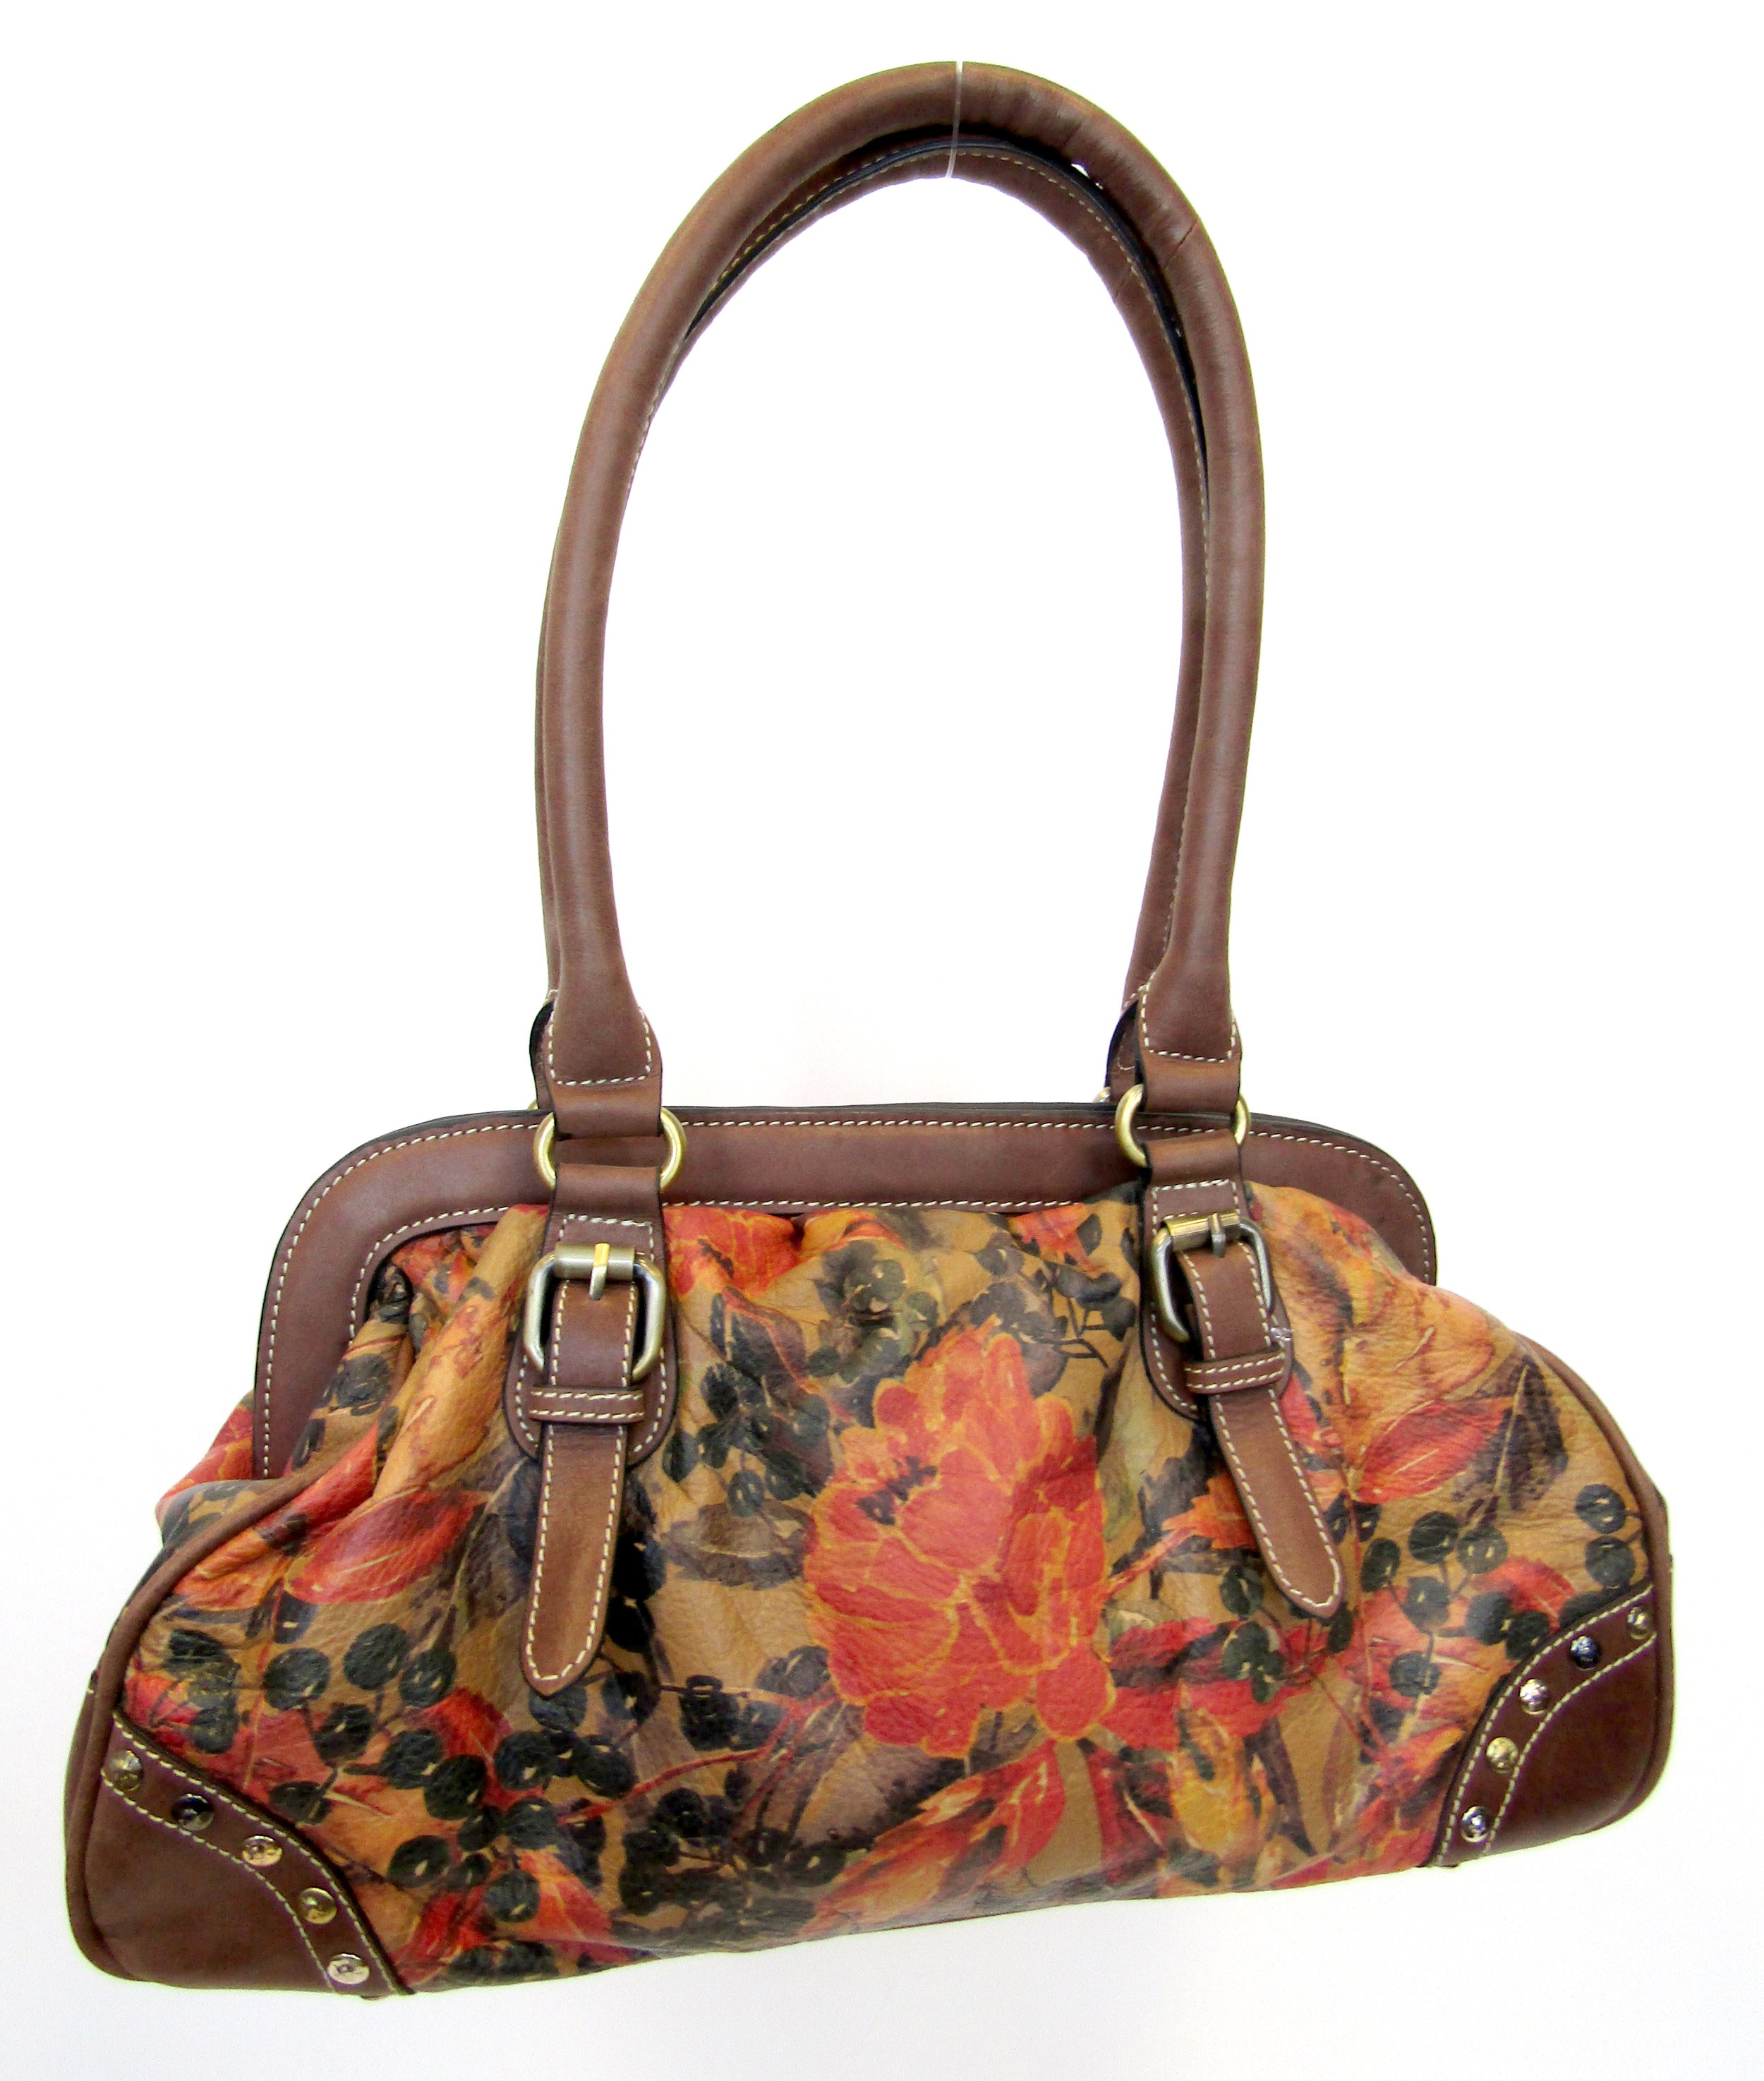 Firenze Bella Tooled Air brushed Floral Leather Tote Bag w/ Pouch Brown NWT 